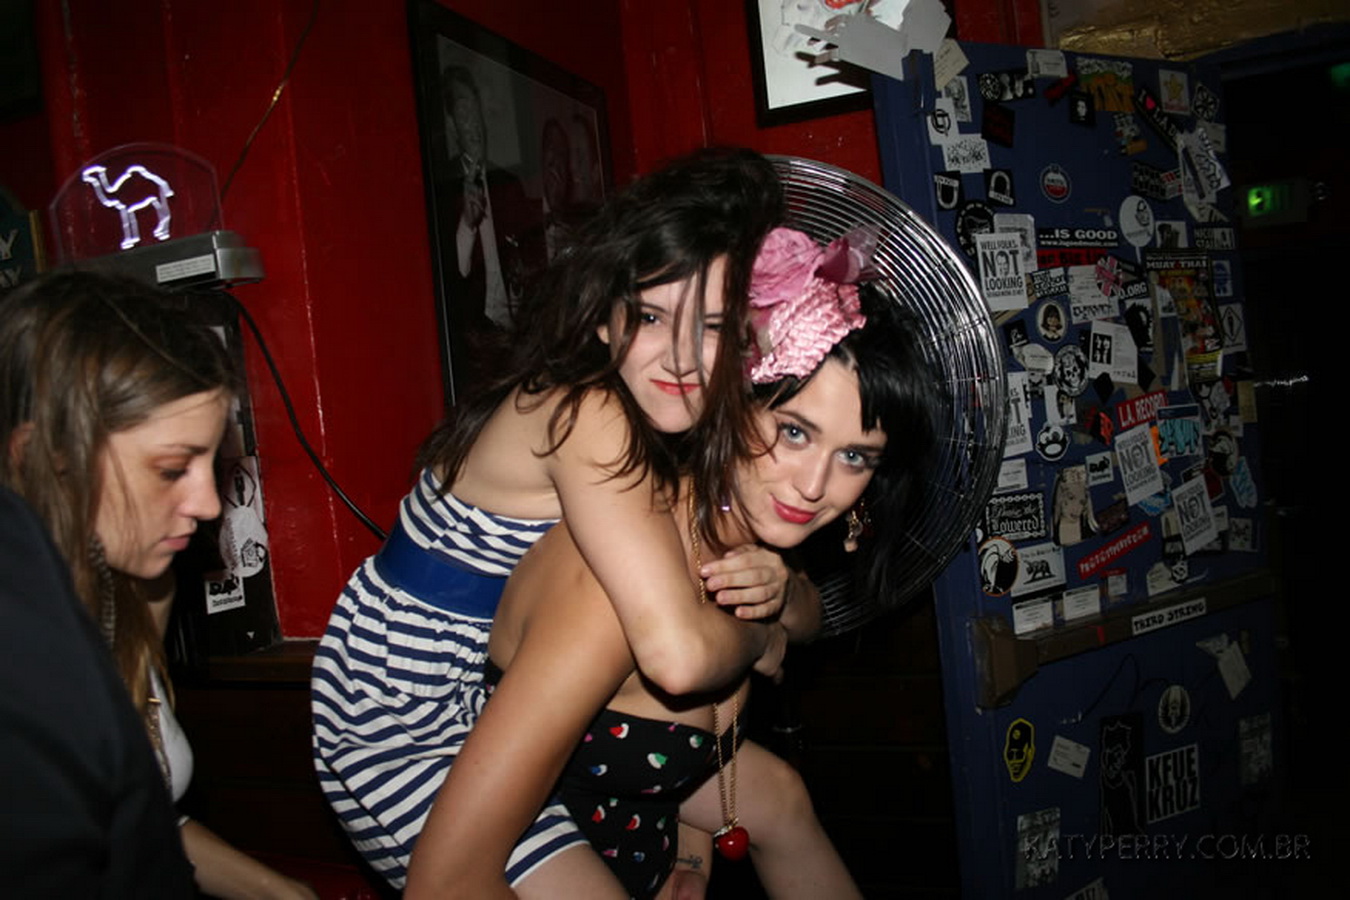 Katy_Perry_bobsslip_drunk_cleavage_downblouse_upskirt_nipslip_at_her_birthday_2007_party_99x_HQ_105.jpg